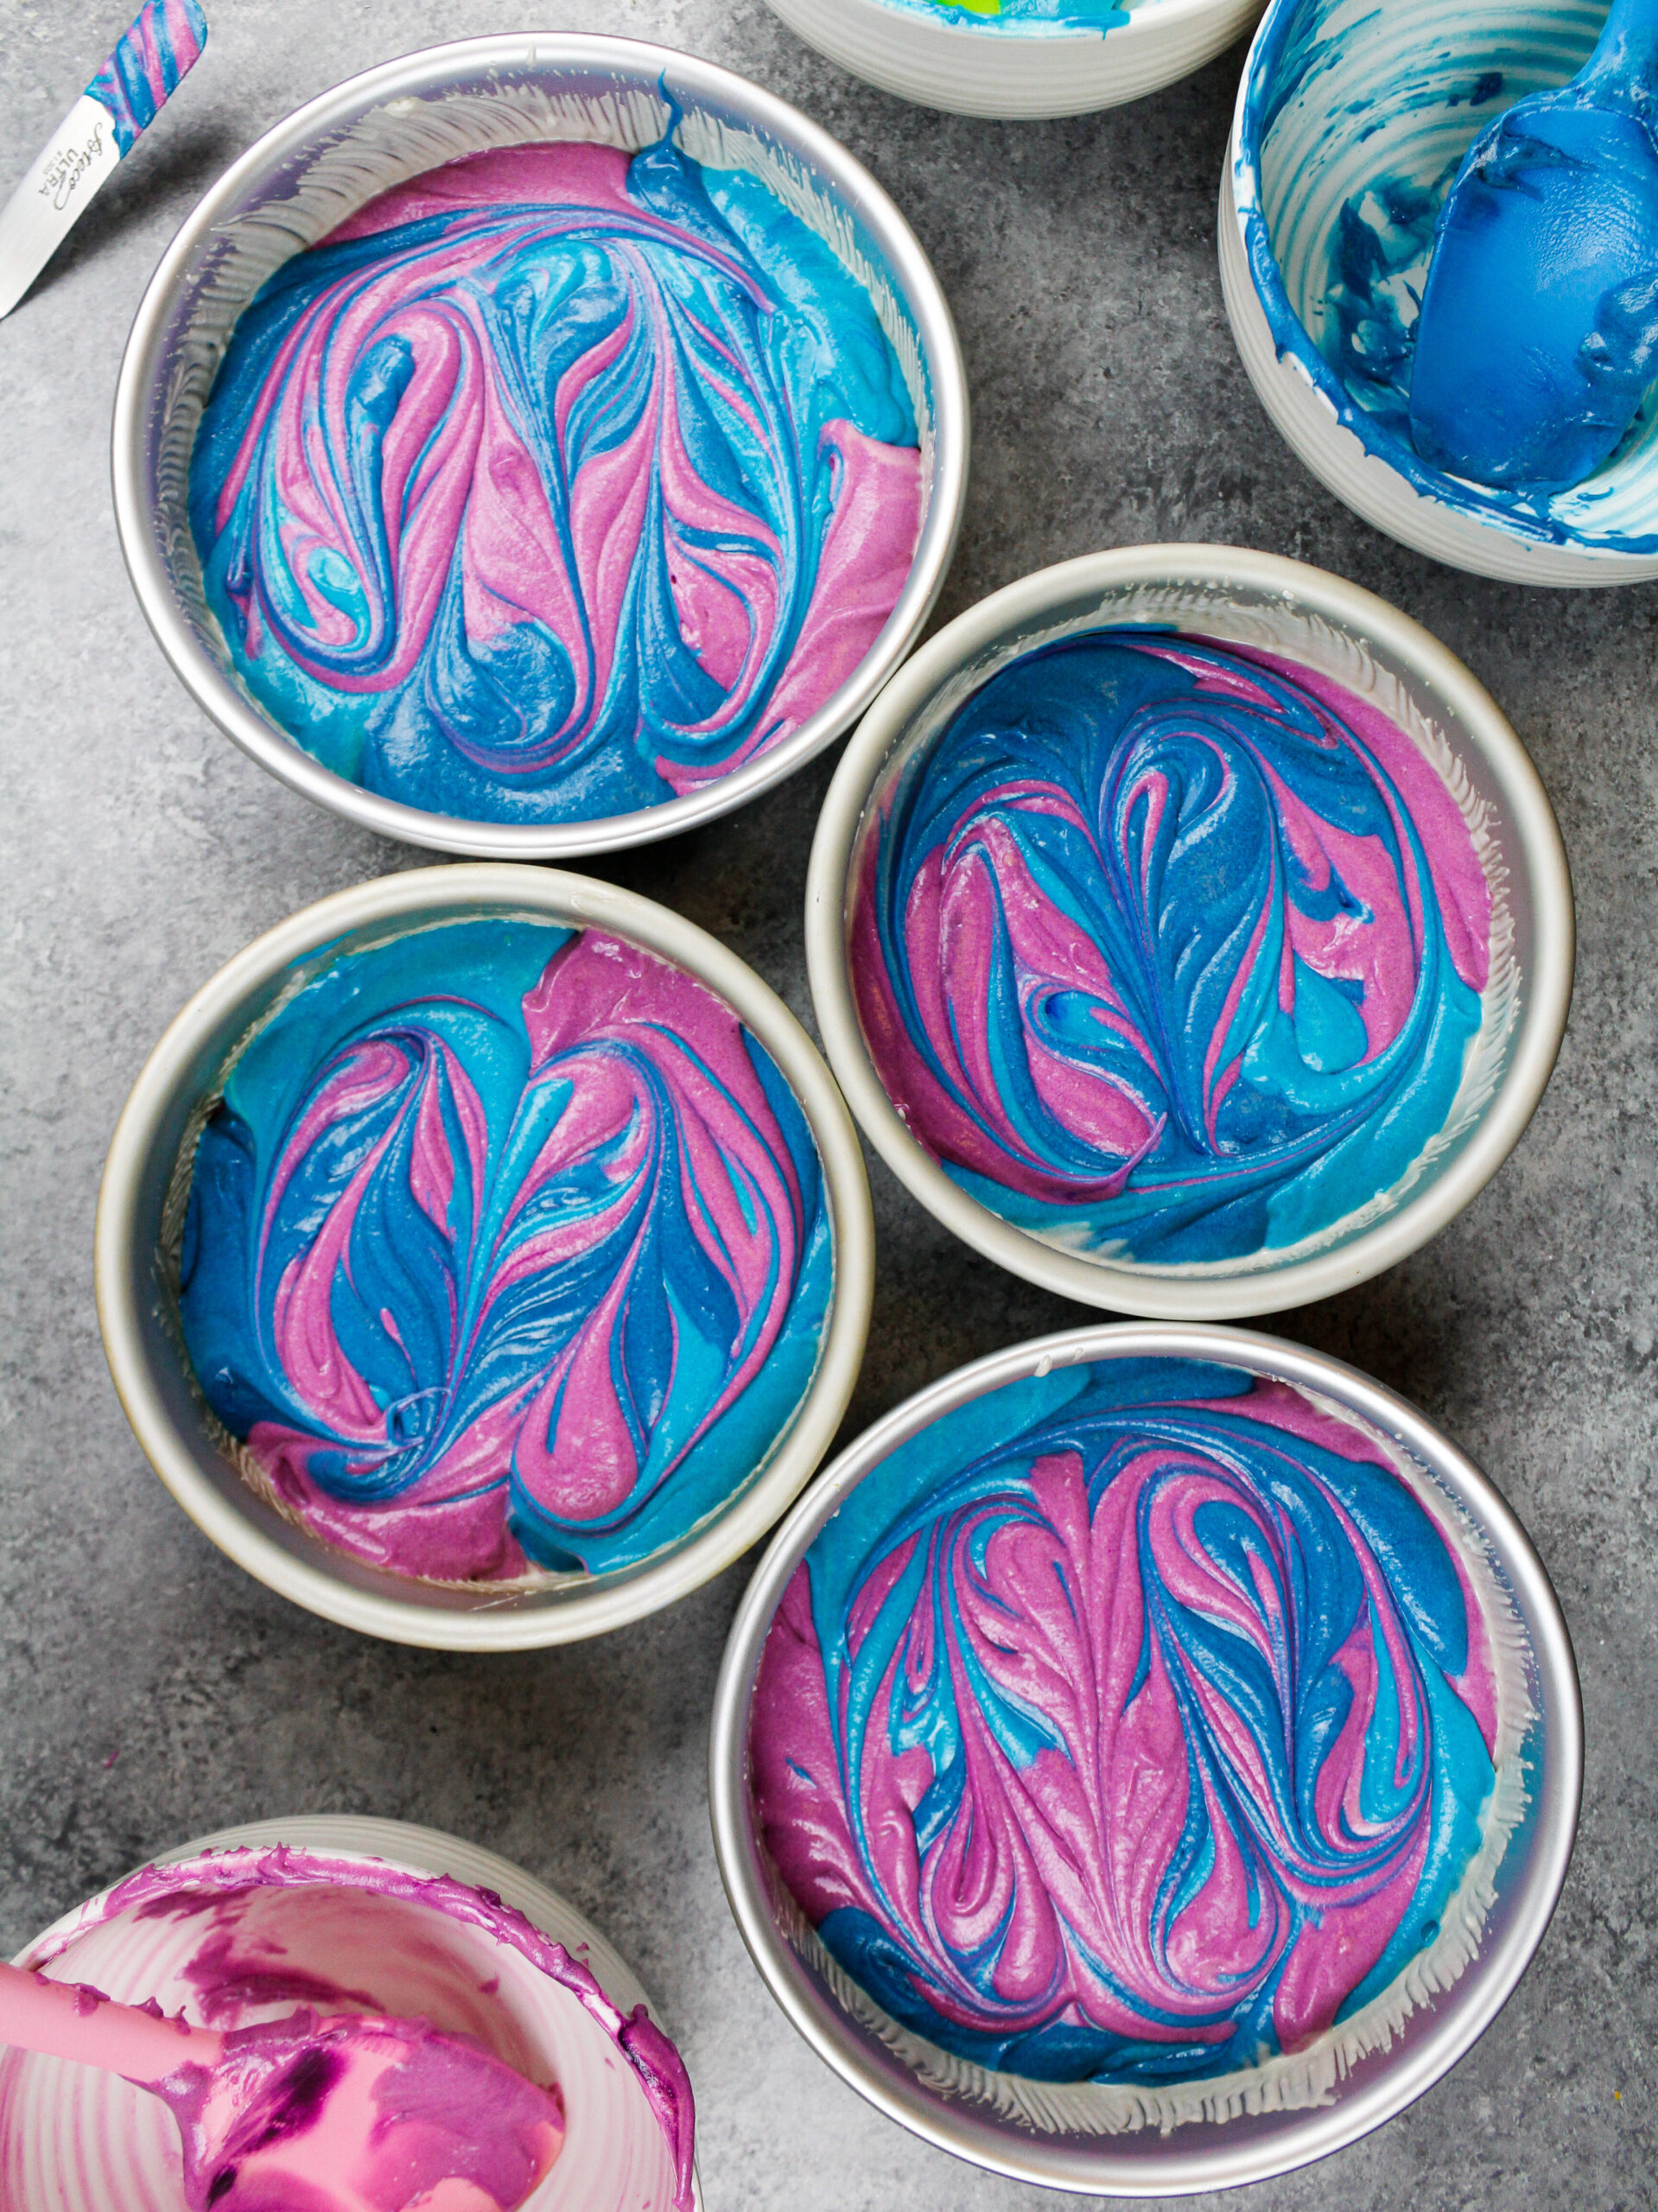 image of colorful swirled cake layers made with purple and blue cake batter